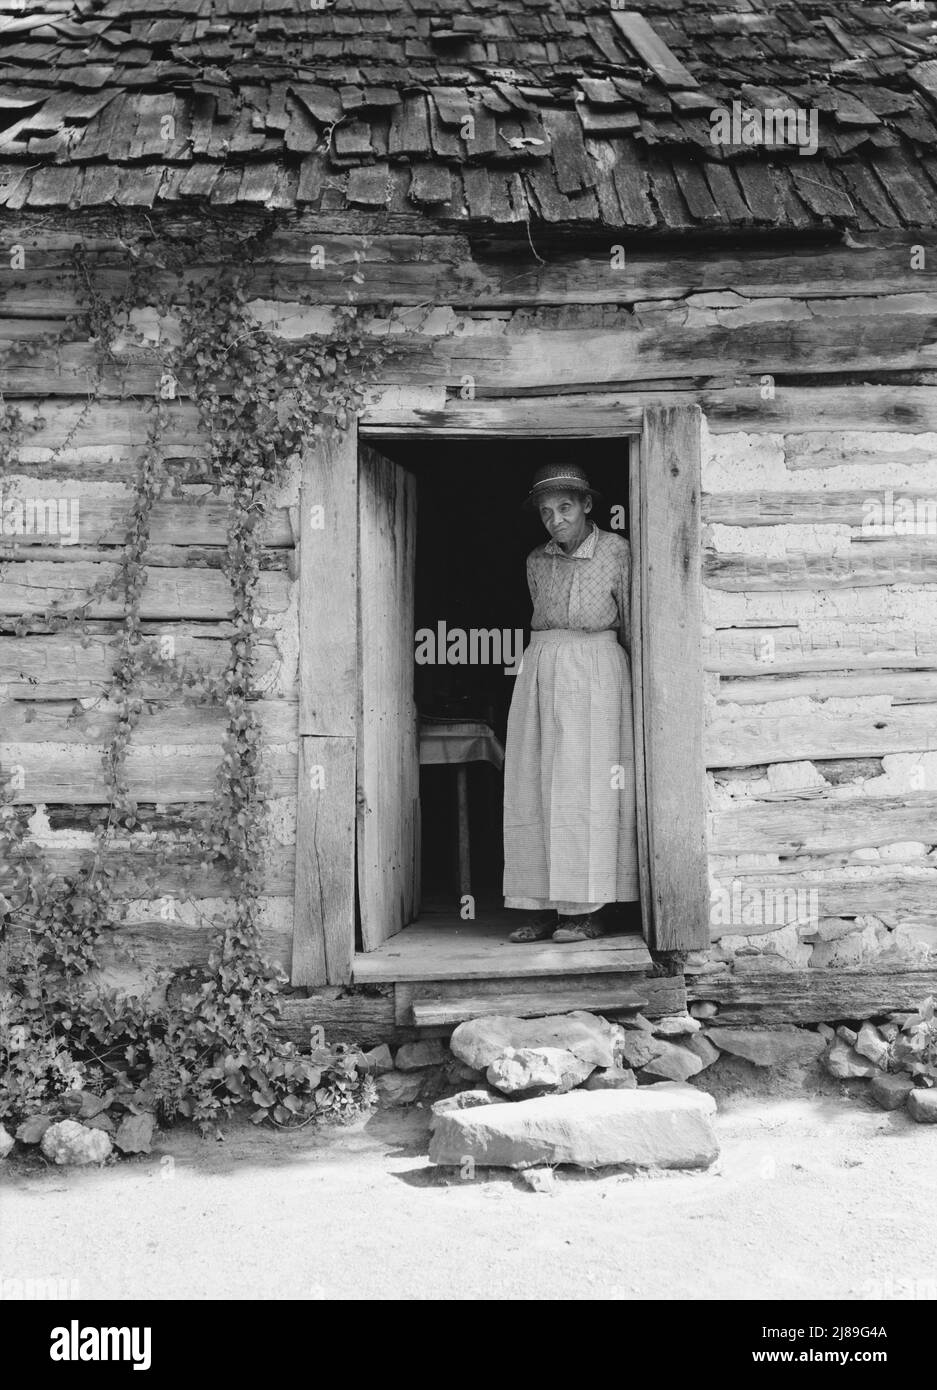 Caroline Atwater standing in the kitchen doorway of double one and a half story log house. North Carolina. Stock Photo